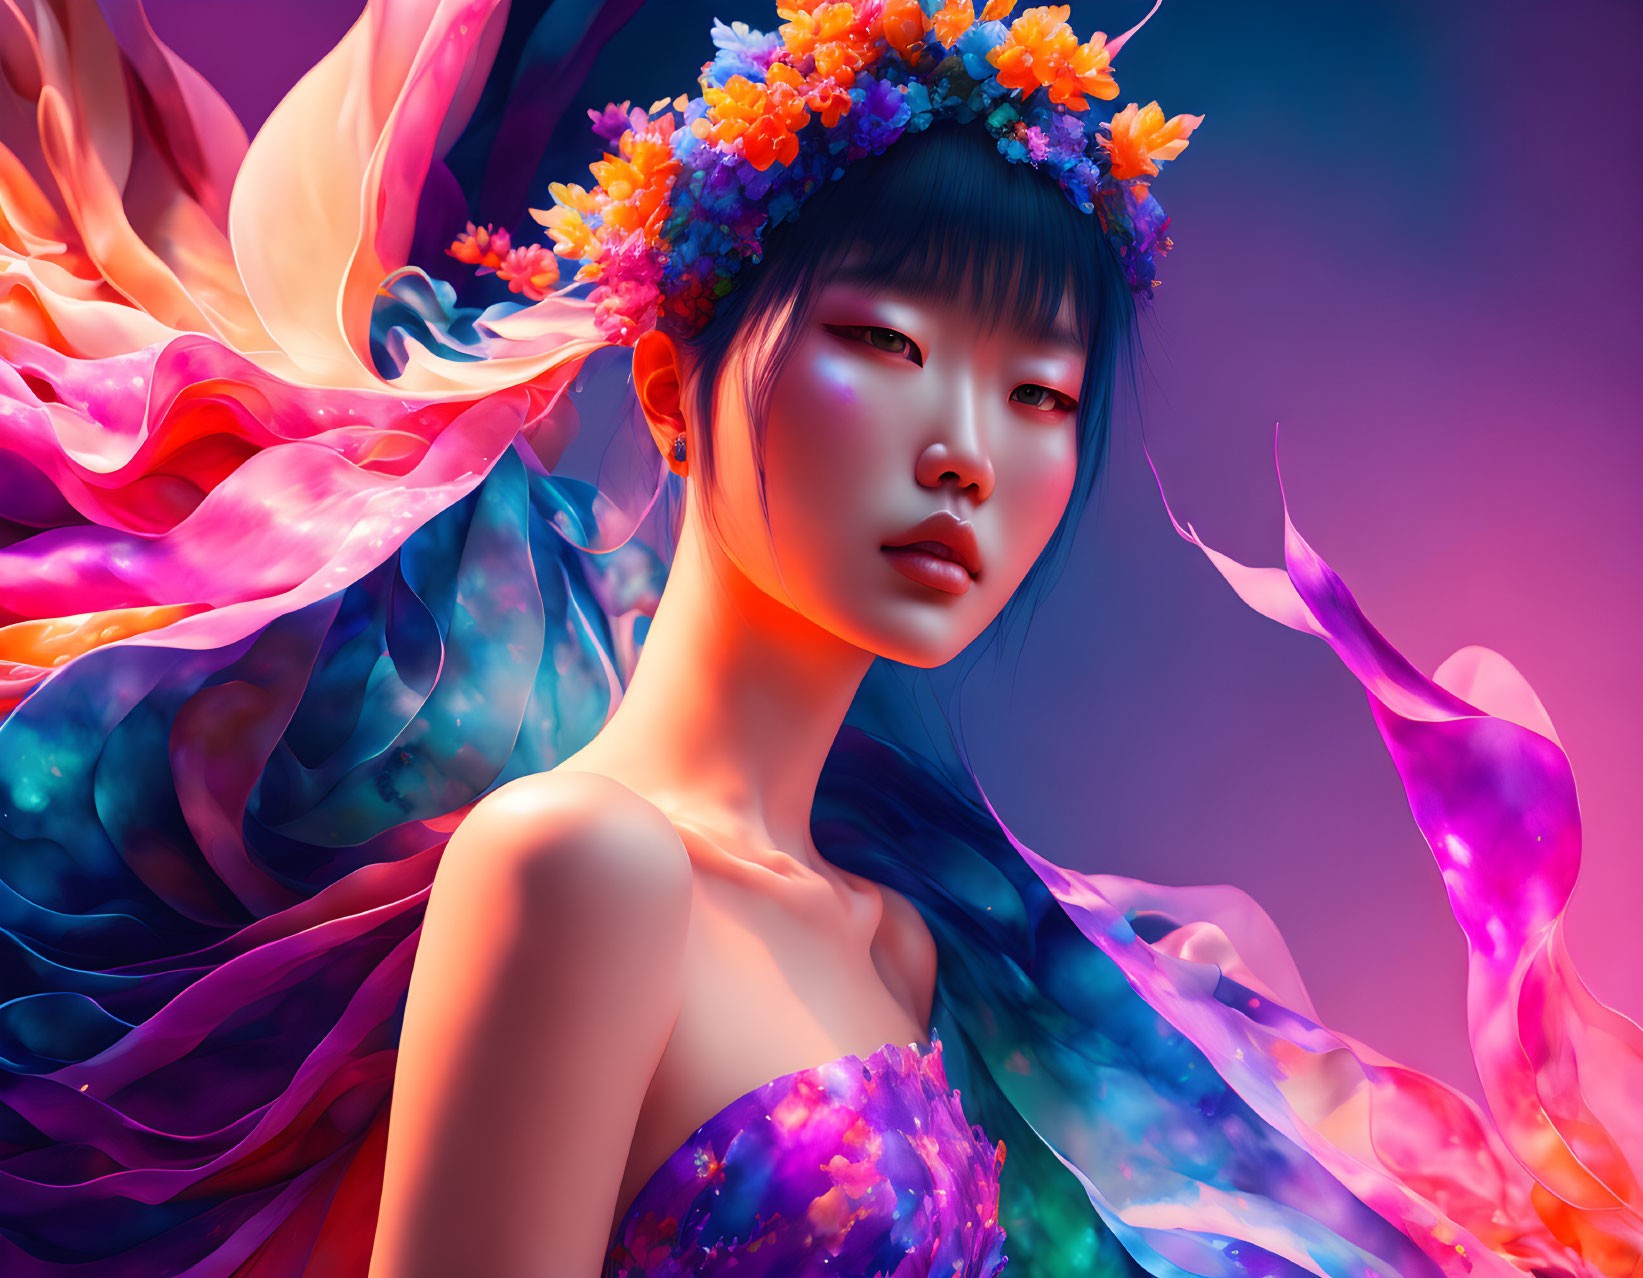 Colorful surreal portrait of a woman with flowing fabric and floral crown